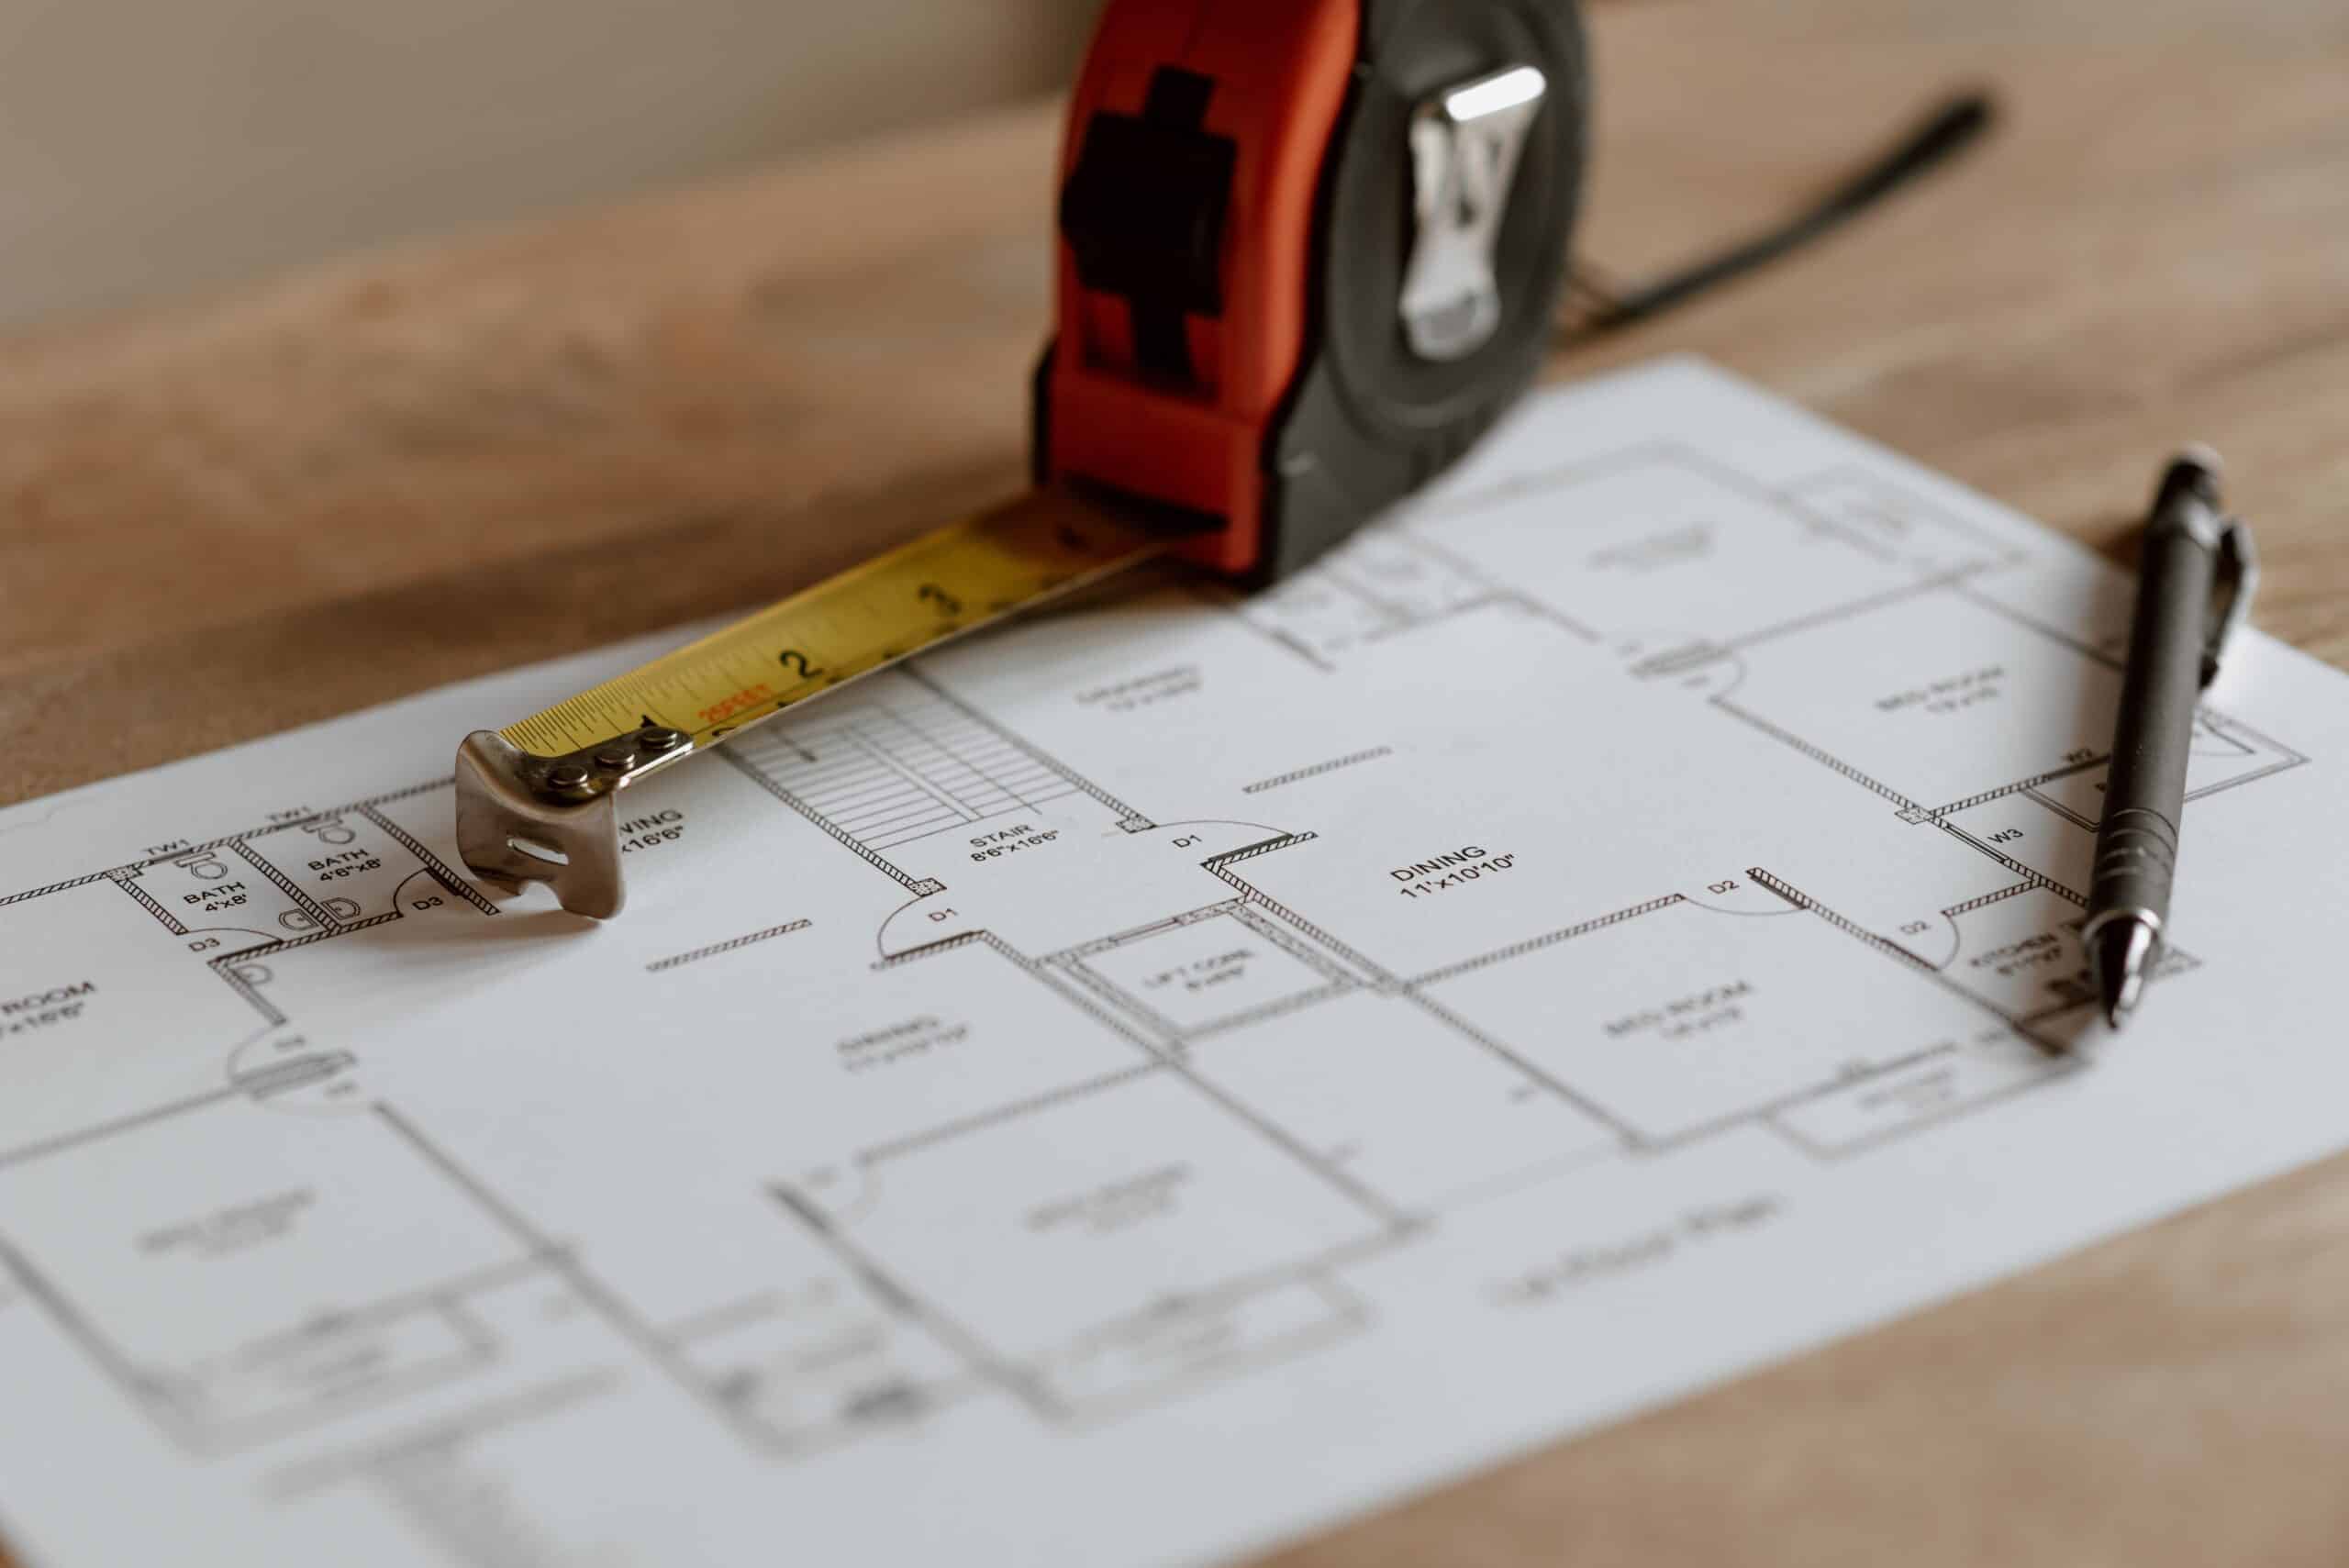 Basement Construction | A construction meter on top of a building plan.